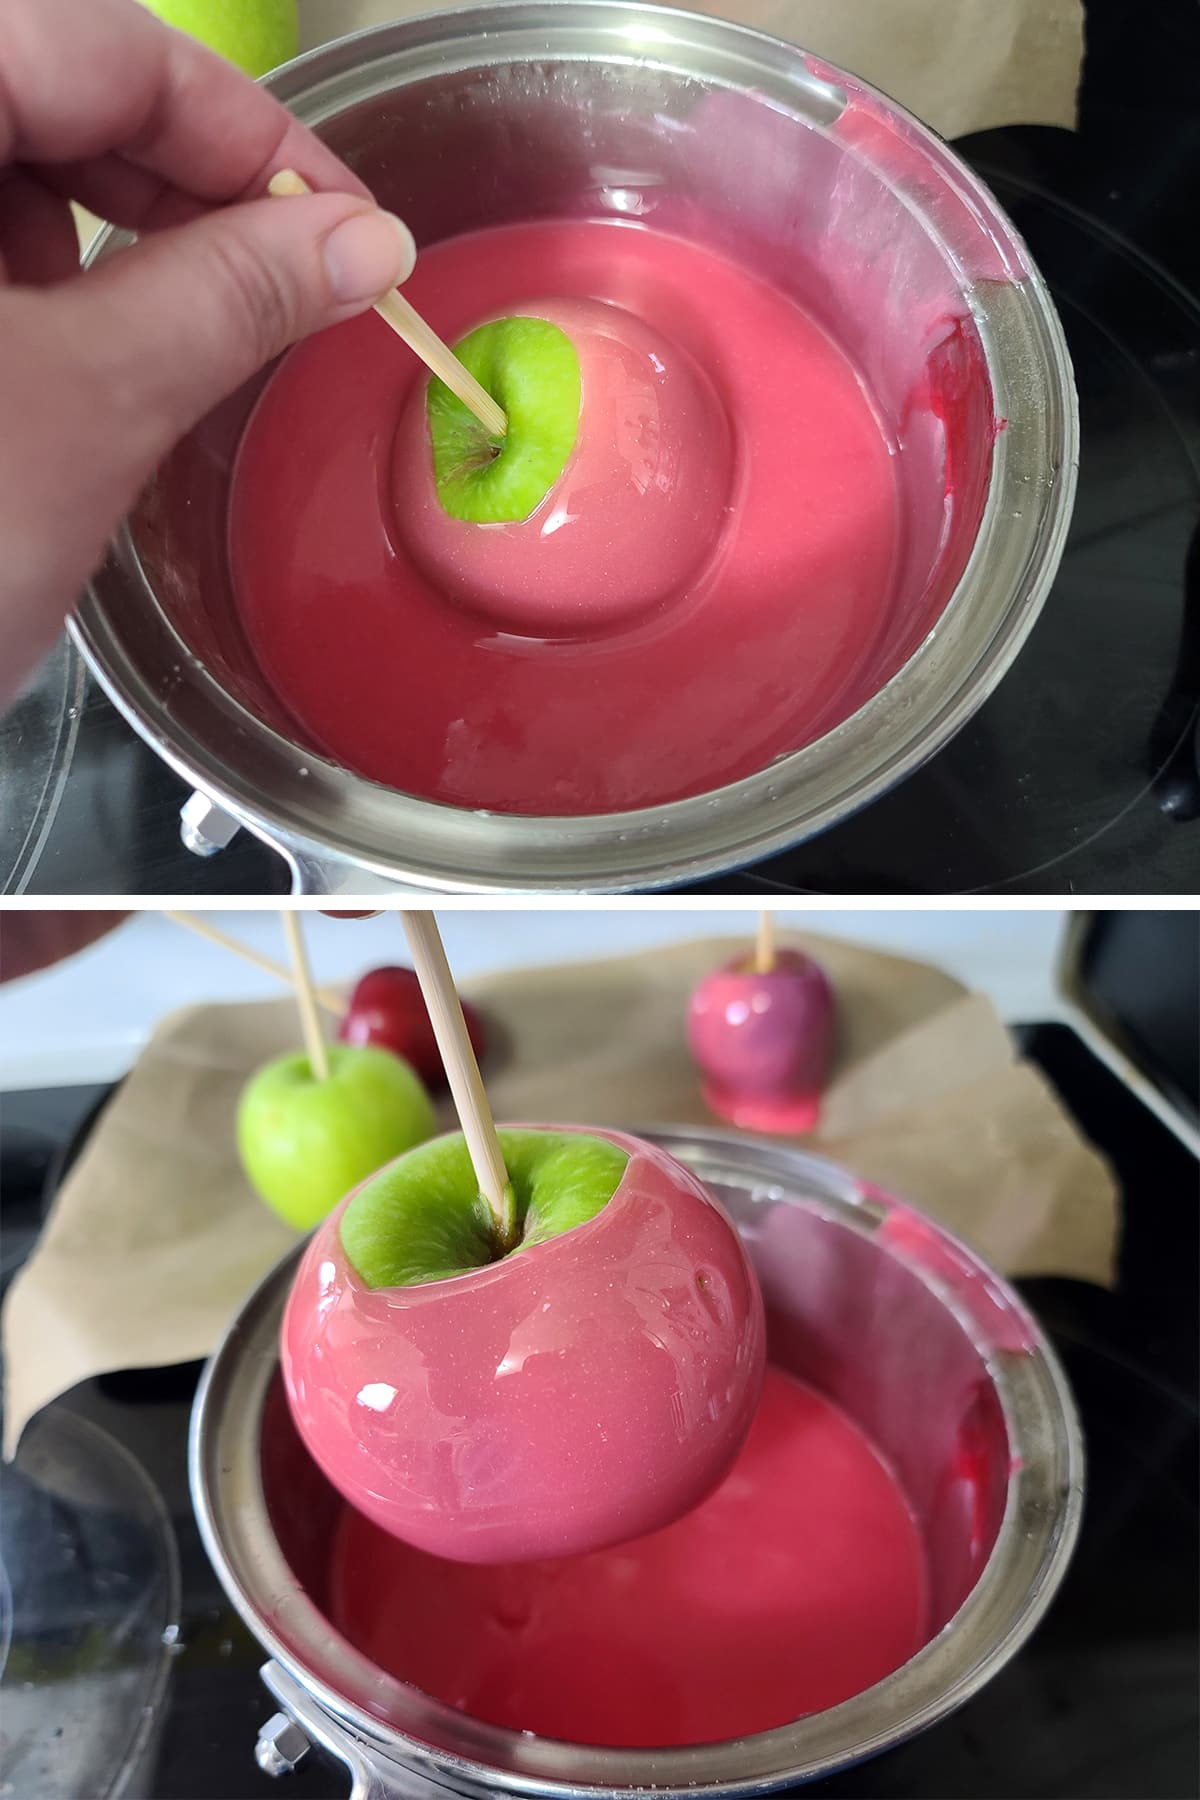 A 2 part image showing a green apple being dipped in an opaque pink candy syrup.